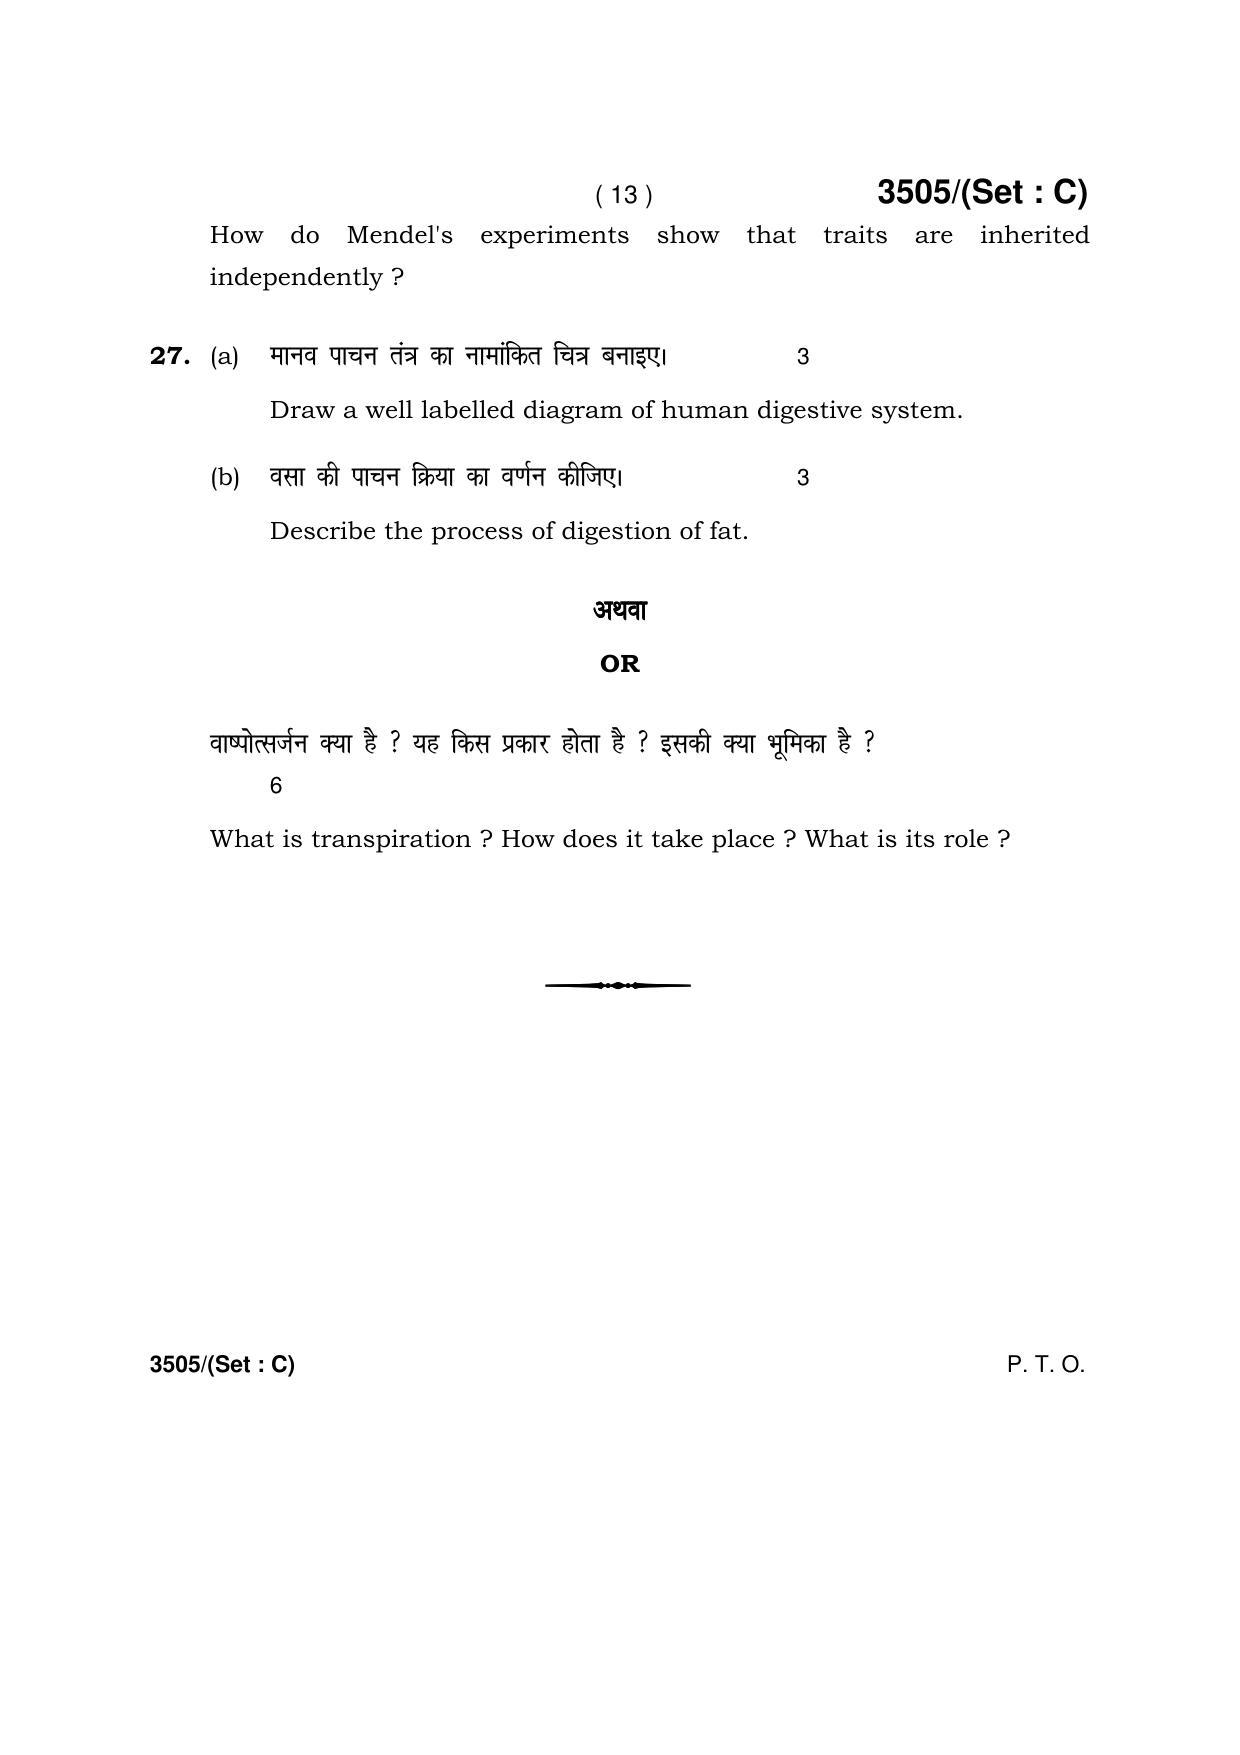 Haryana Board HBSE Class 10 Science -C 2018 Question Paper - Page 13